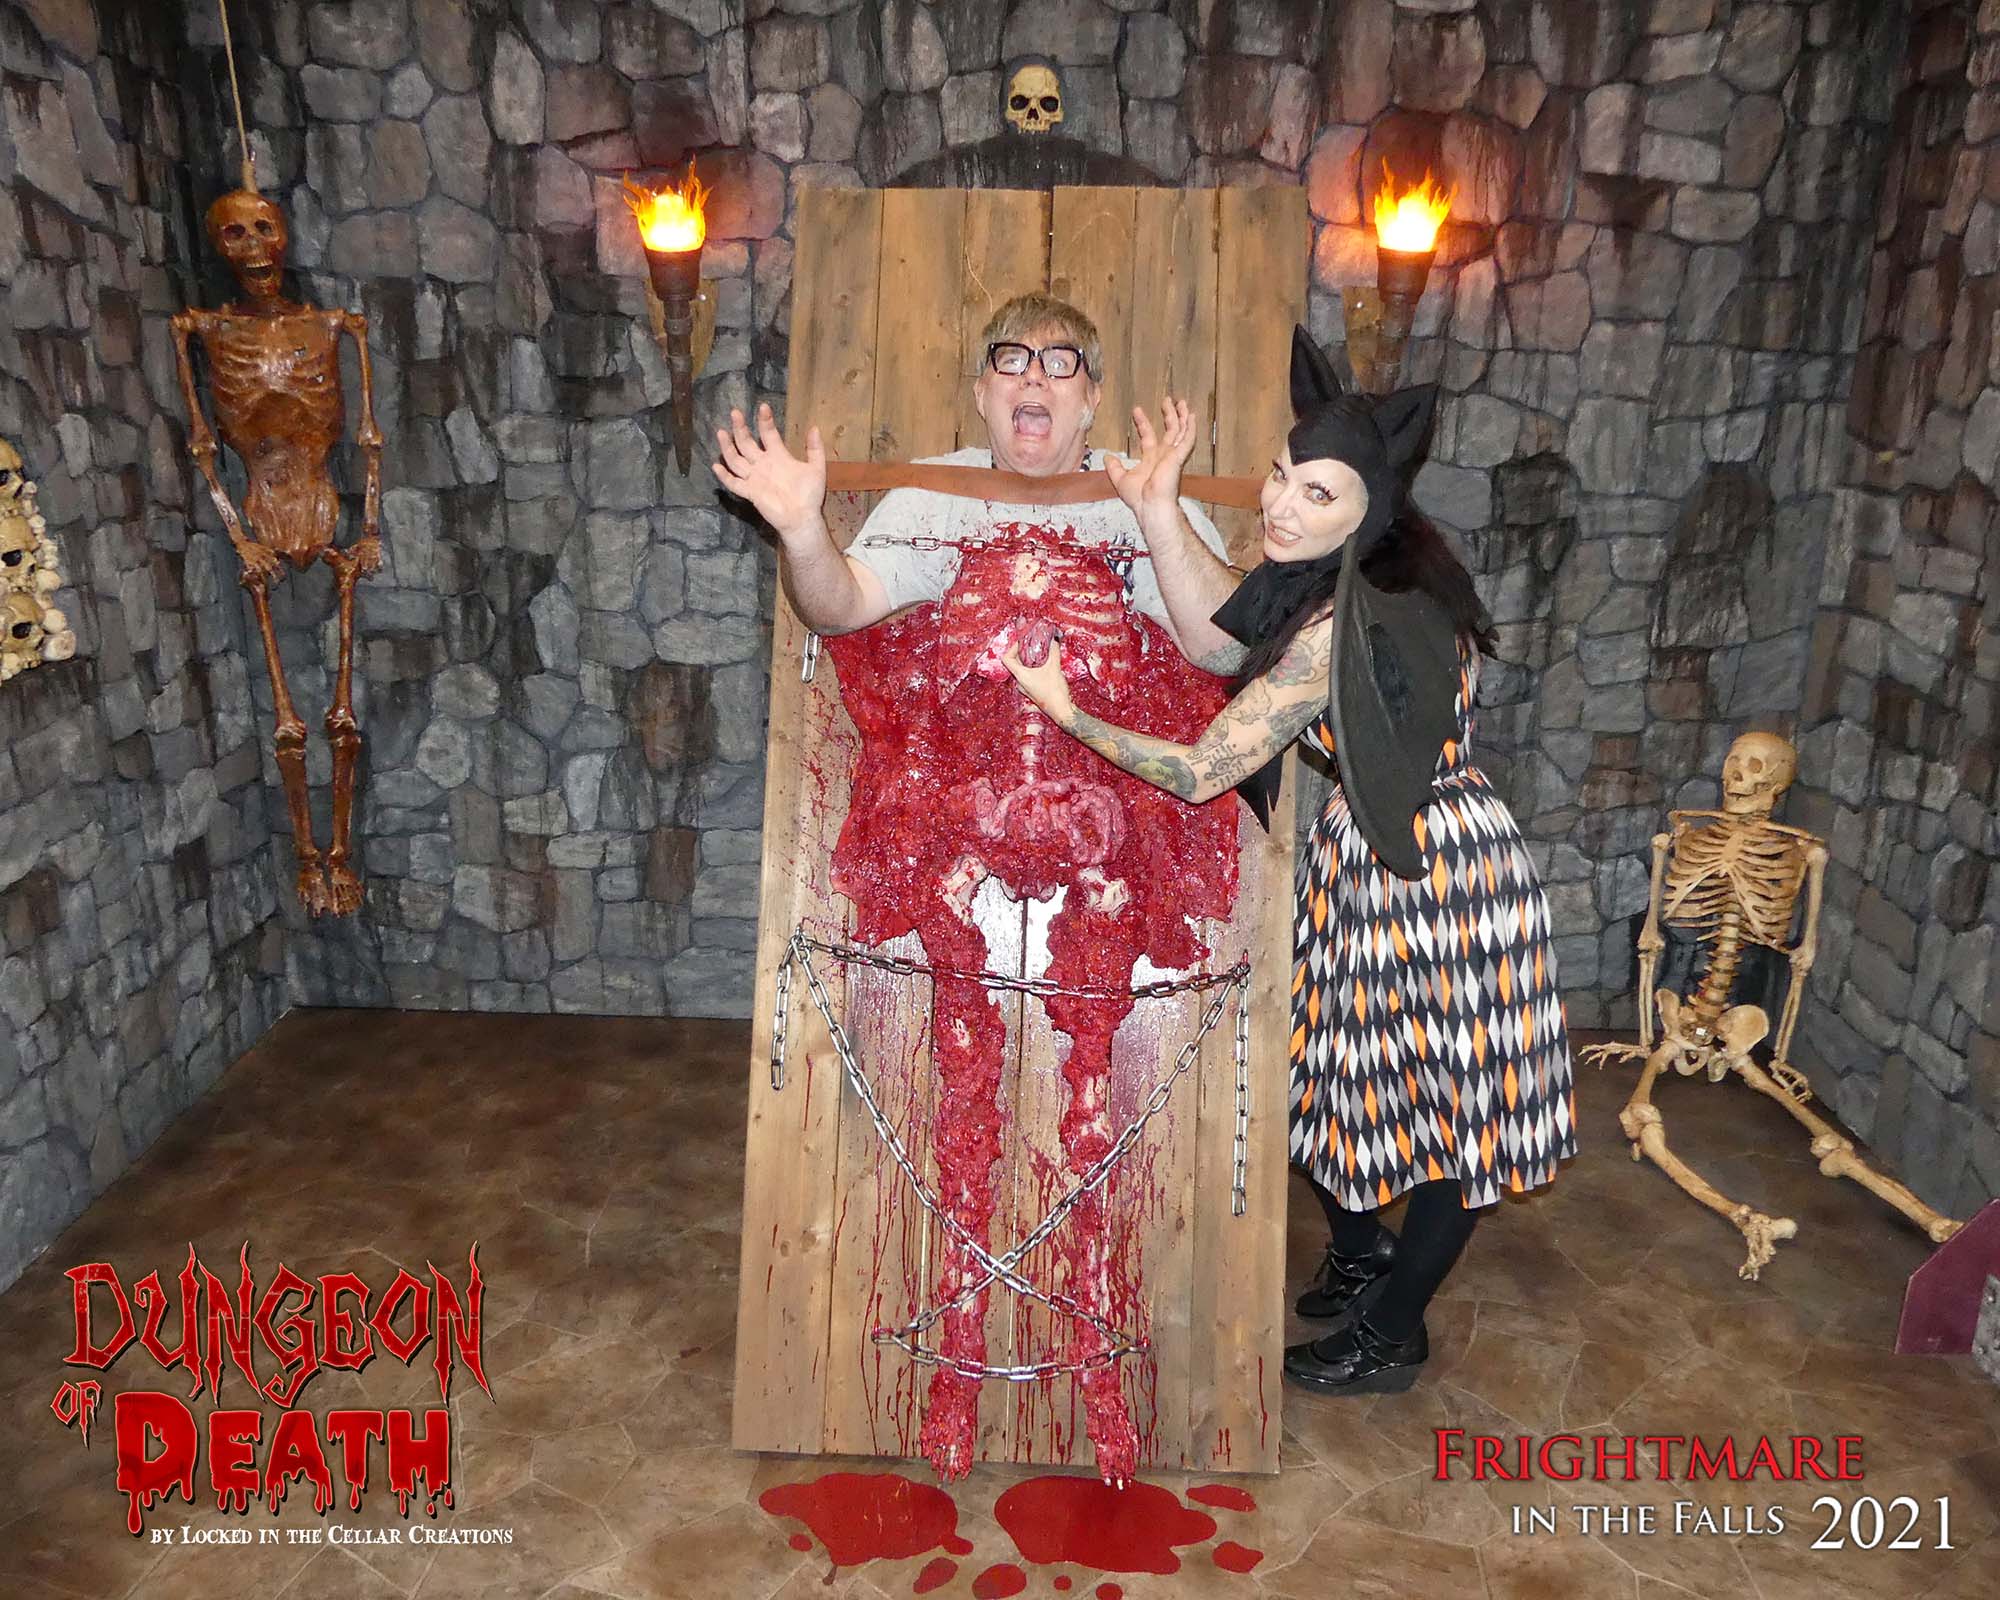 Horror queen Thea and her Adam are hamming it up for a great photo!